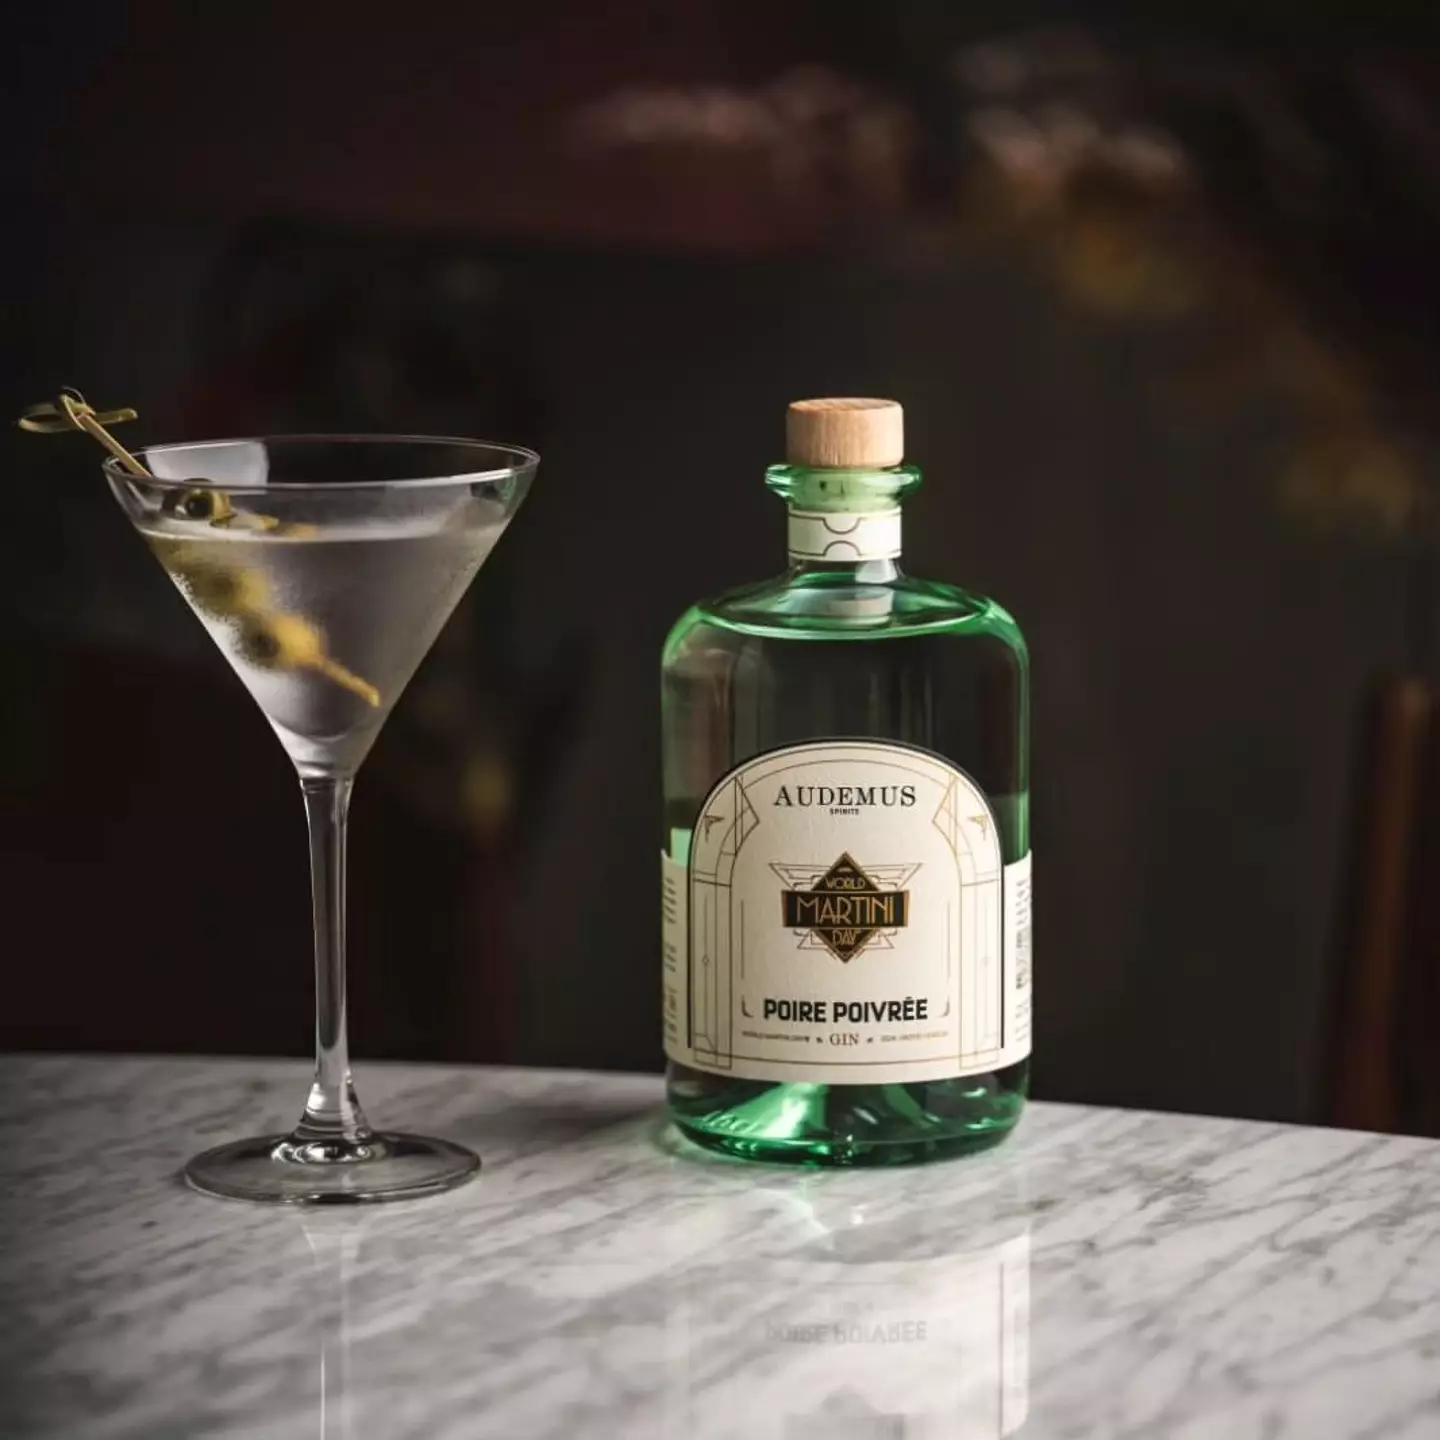 This limited edition gin will be sure to prove a hit with many different dads.